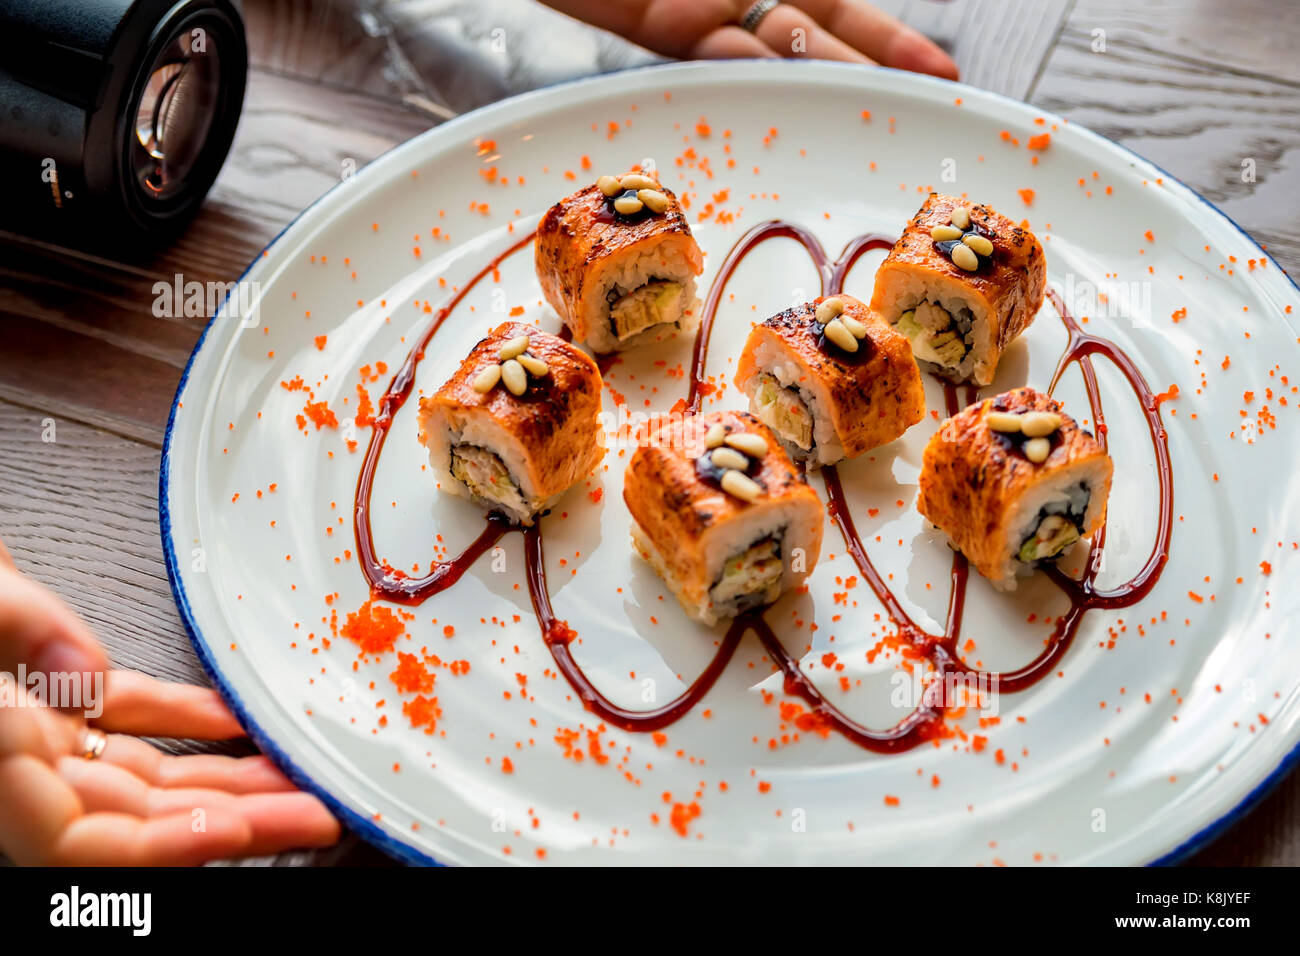 Food photographer takes picure of sushi rolls Stock Photo